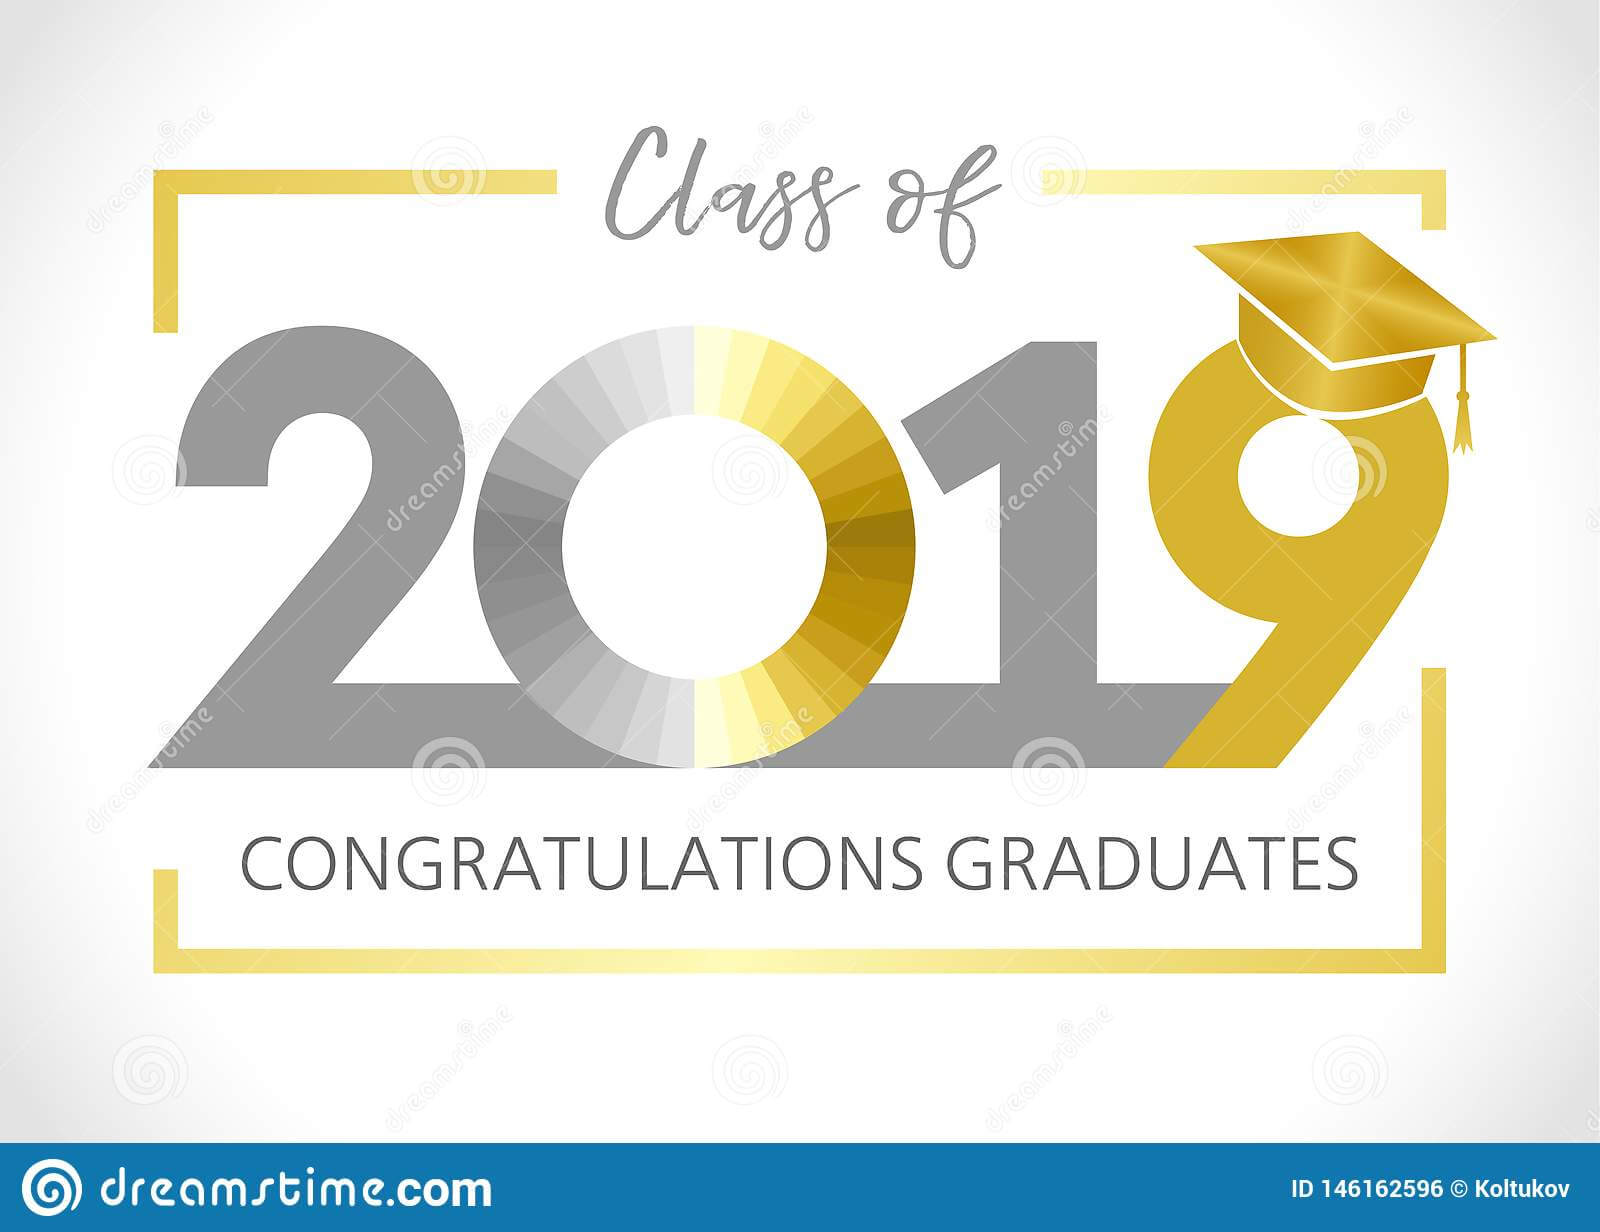 Graduating Class Of 2019 Vector Illustration Stock Vector With Graduation Banner Template